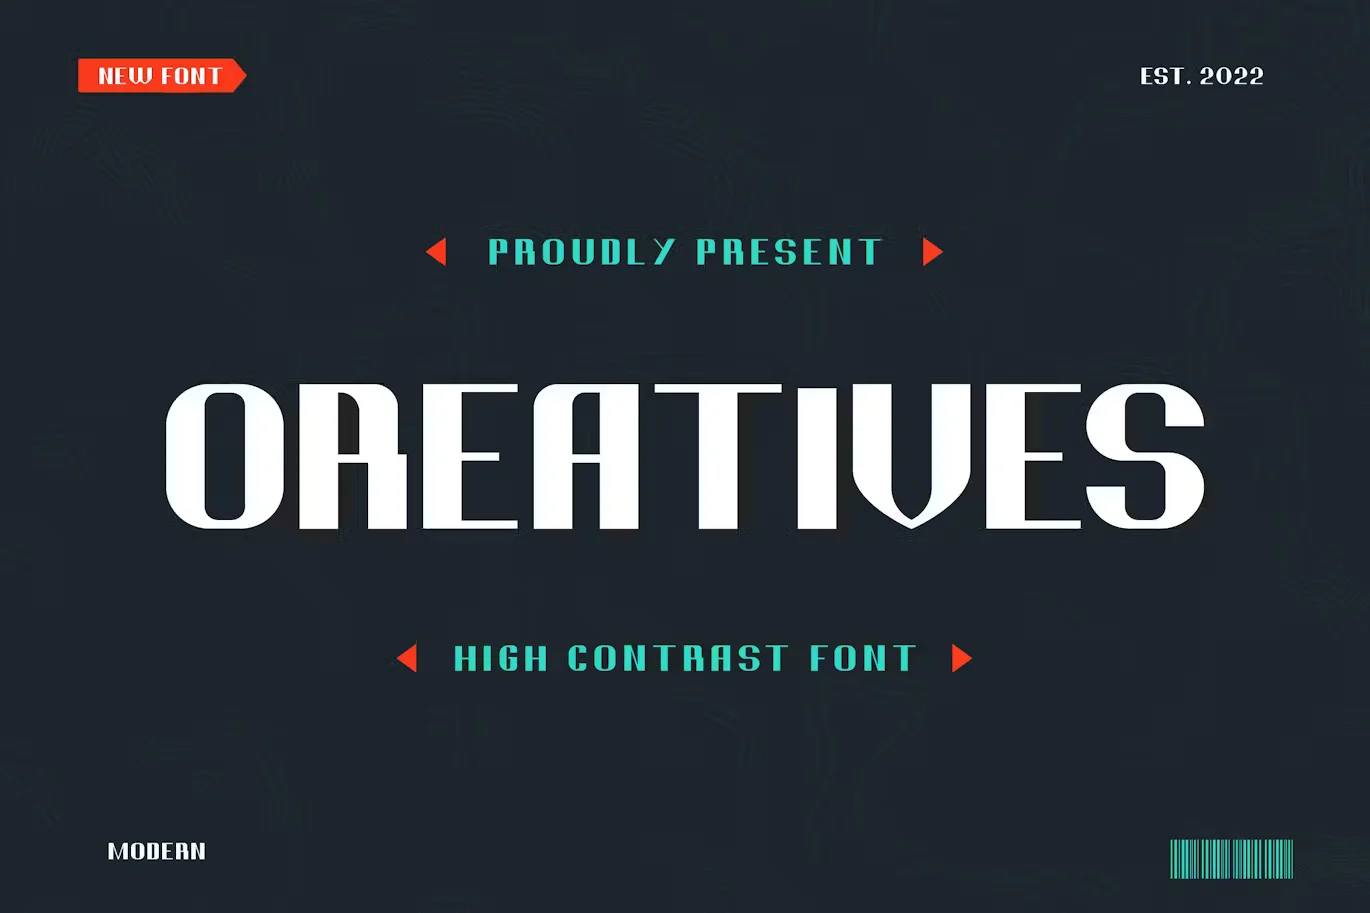 Oreatives - High Contrast Font